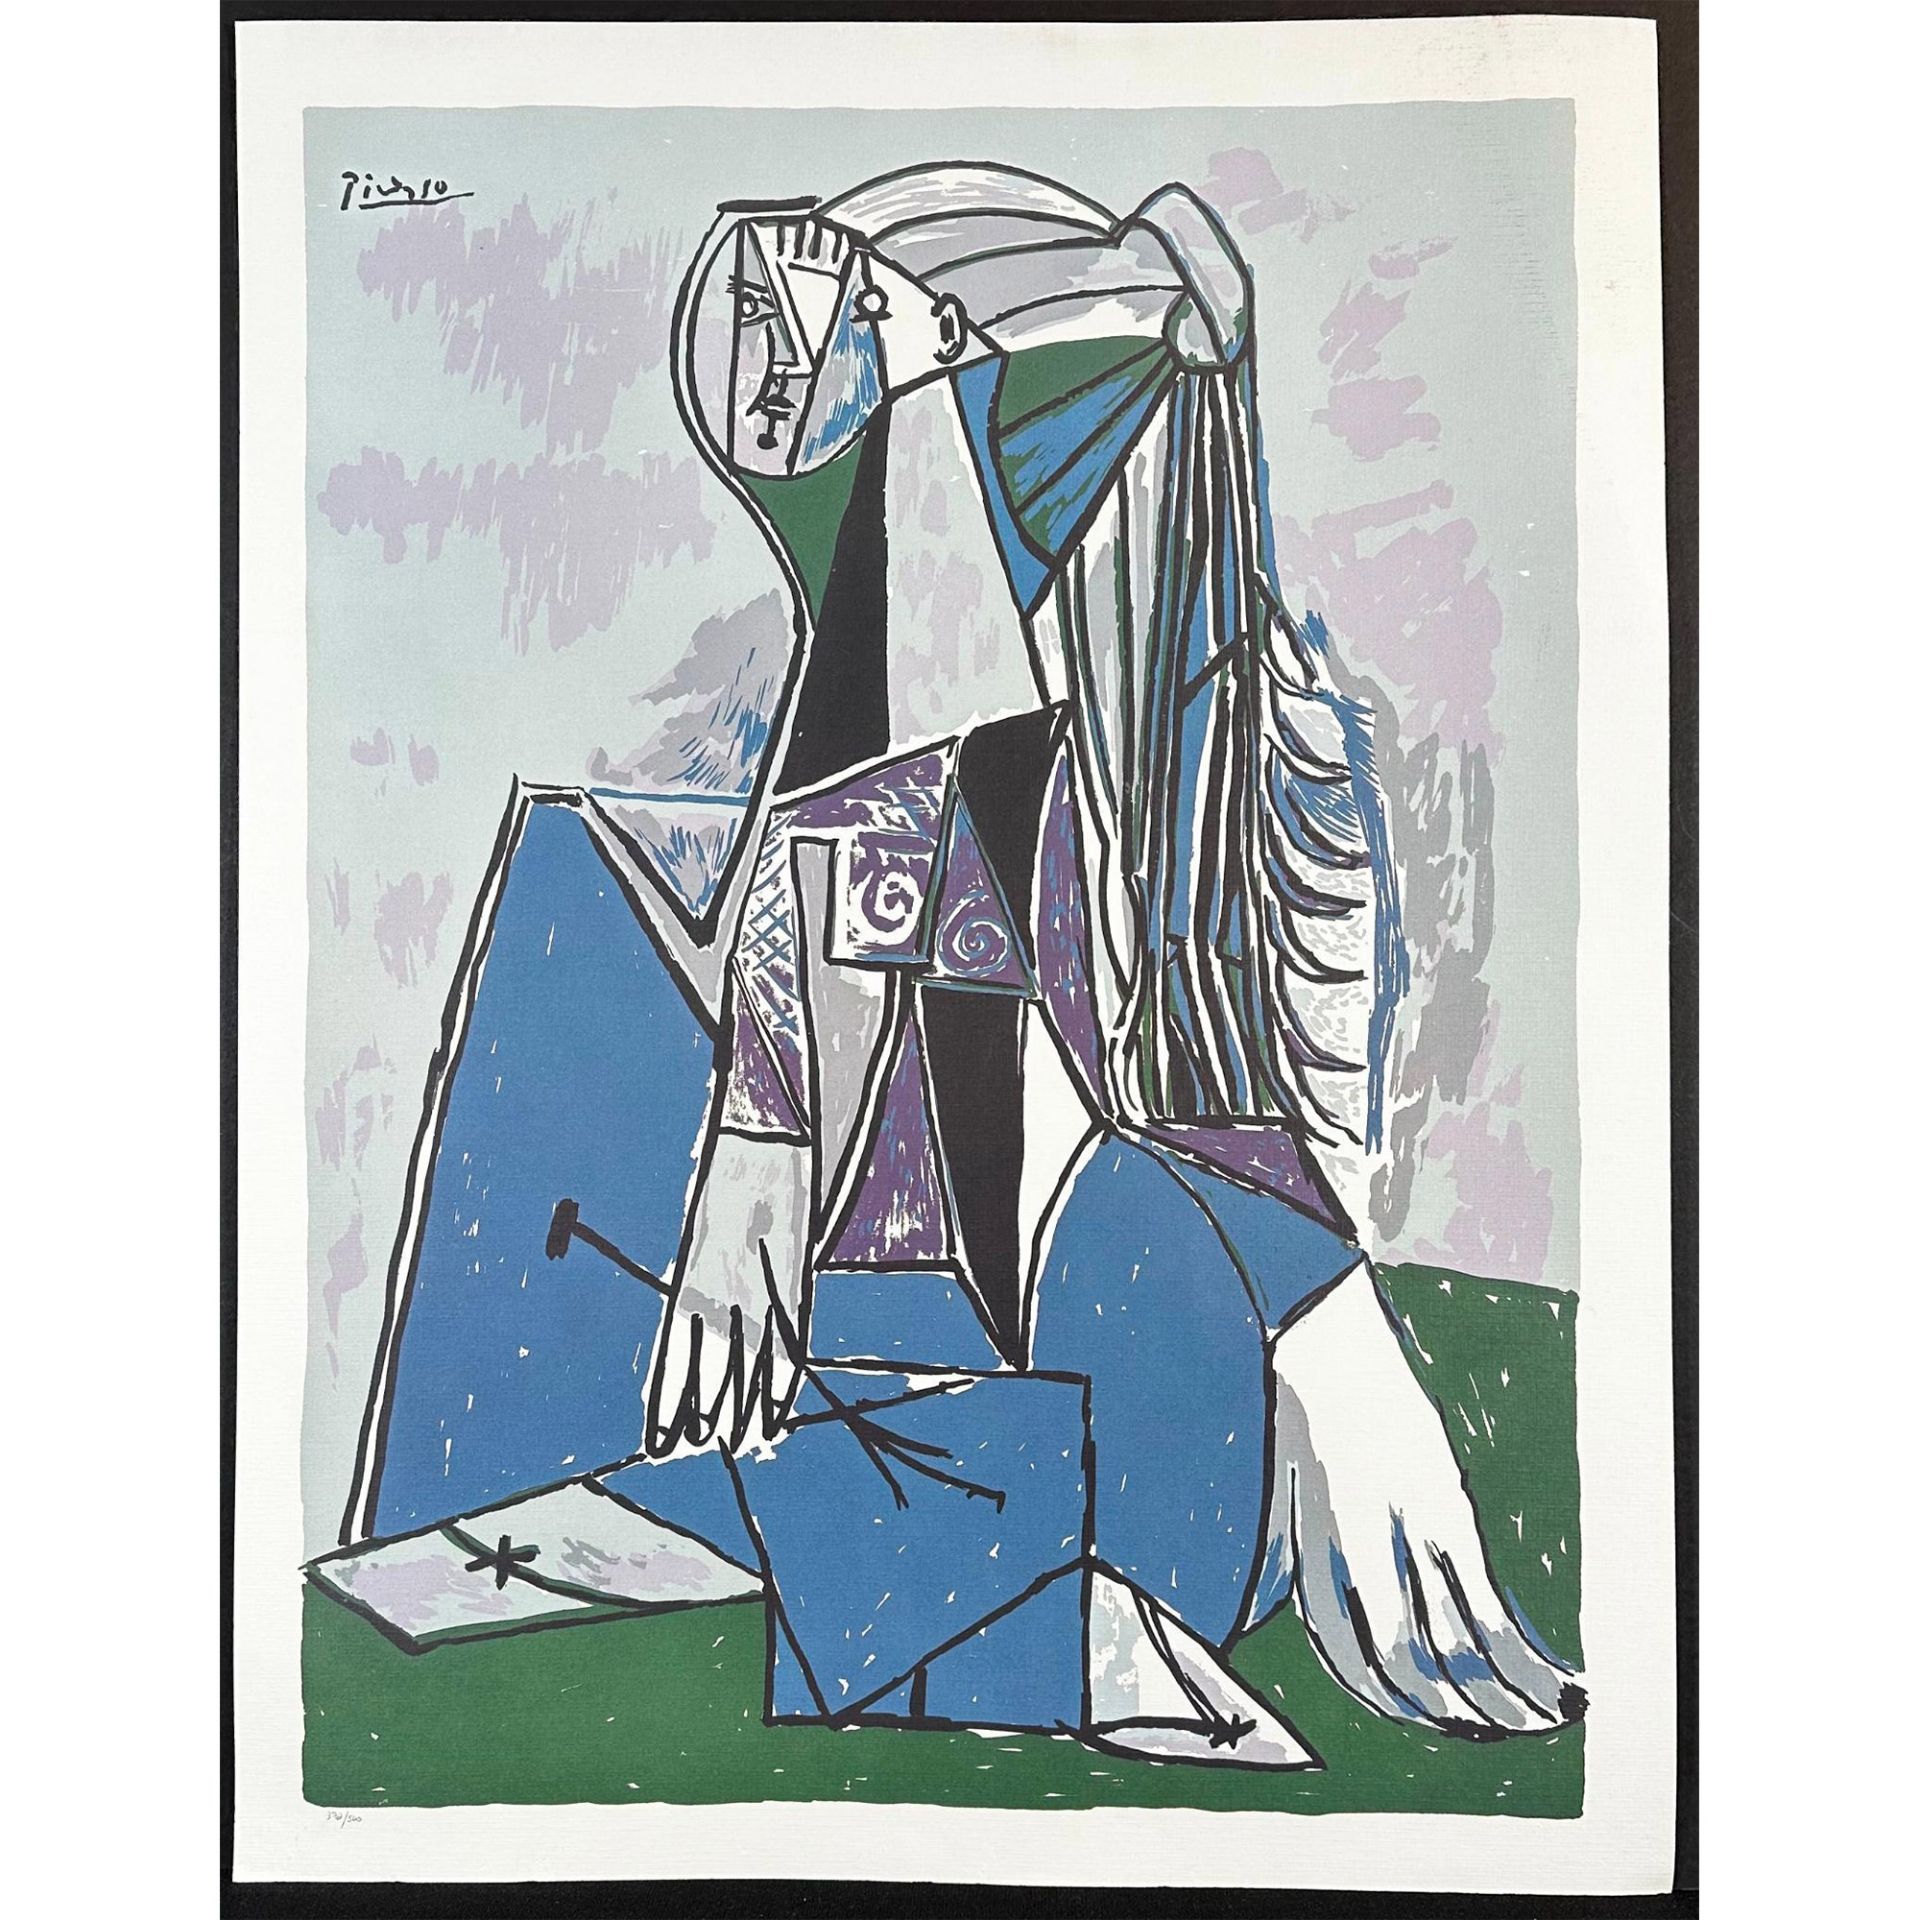 Pablo Picasso (Spanish, 1881-1973) Recreation in a limited edition Lithograph, Untitled, Facsimile S